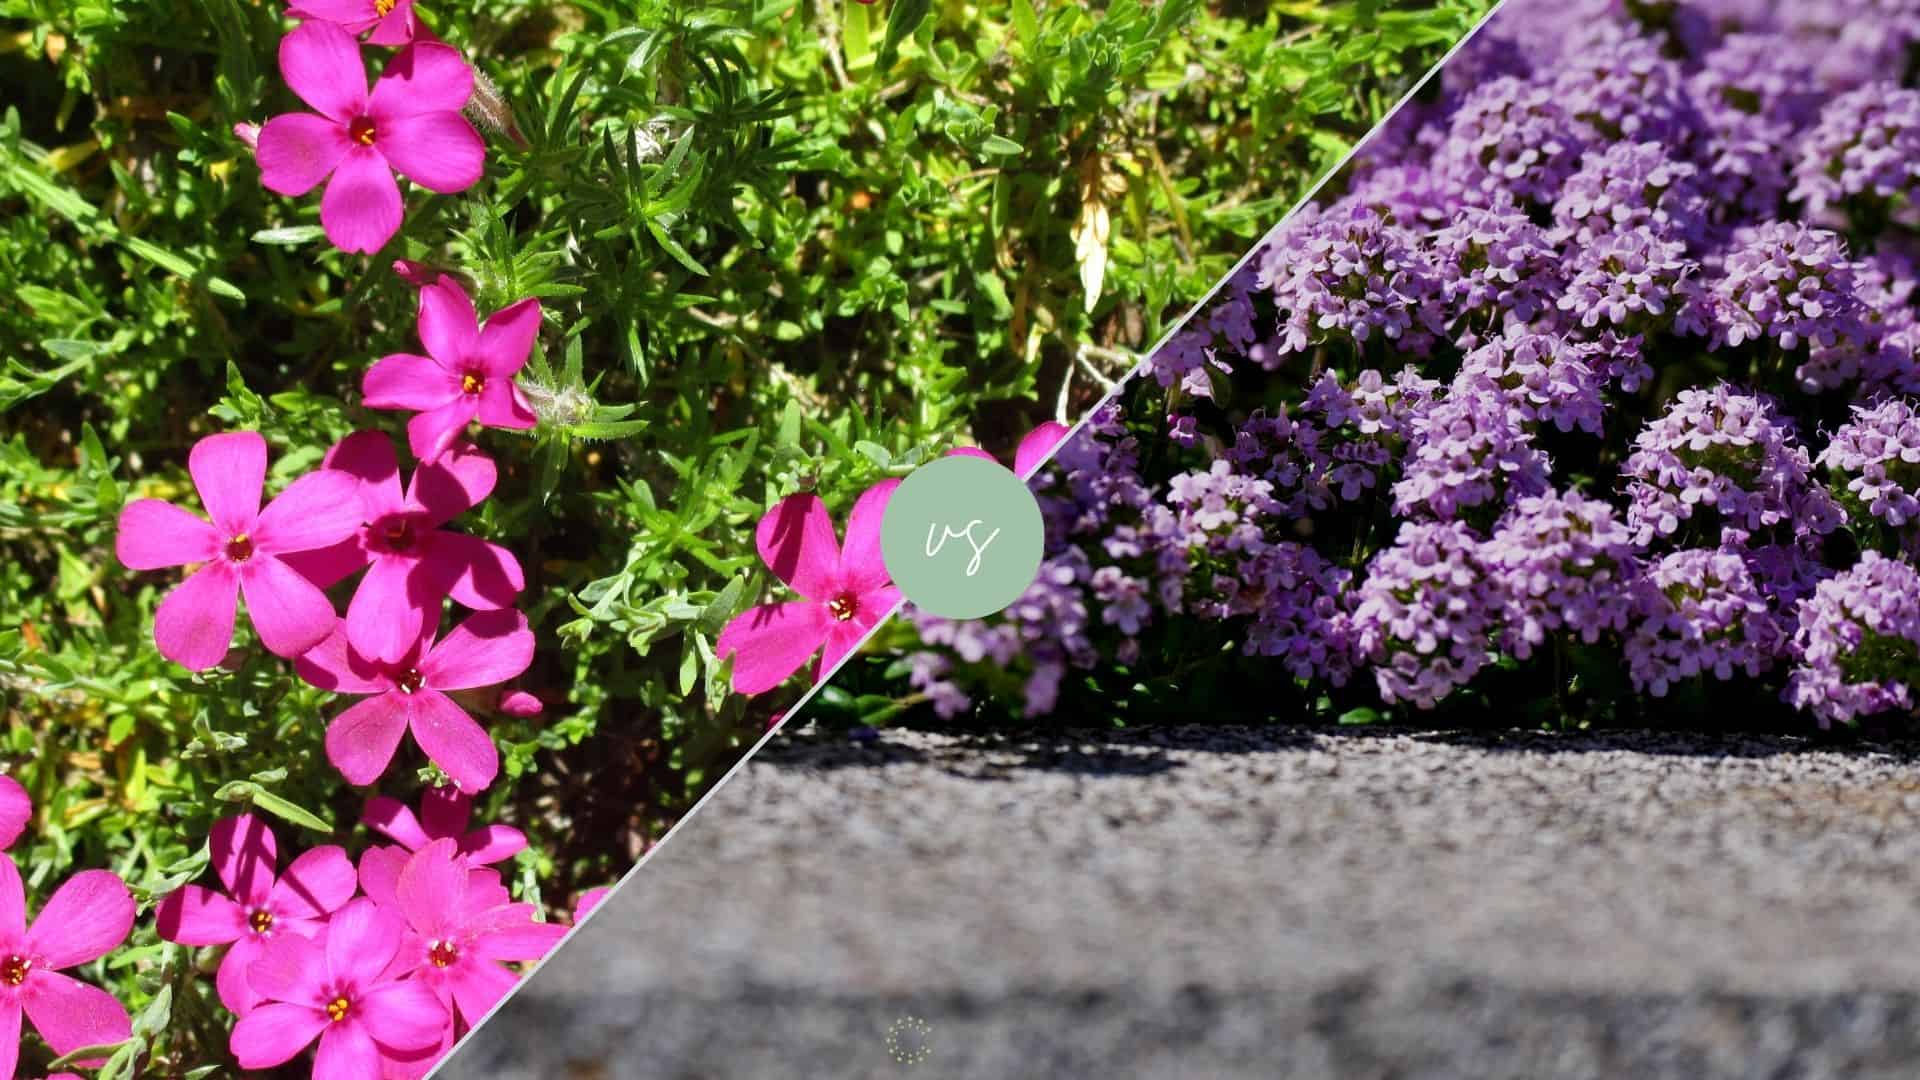 Creeping Phlox vs Creeping Thyme: What Is Better Ground Cover?